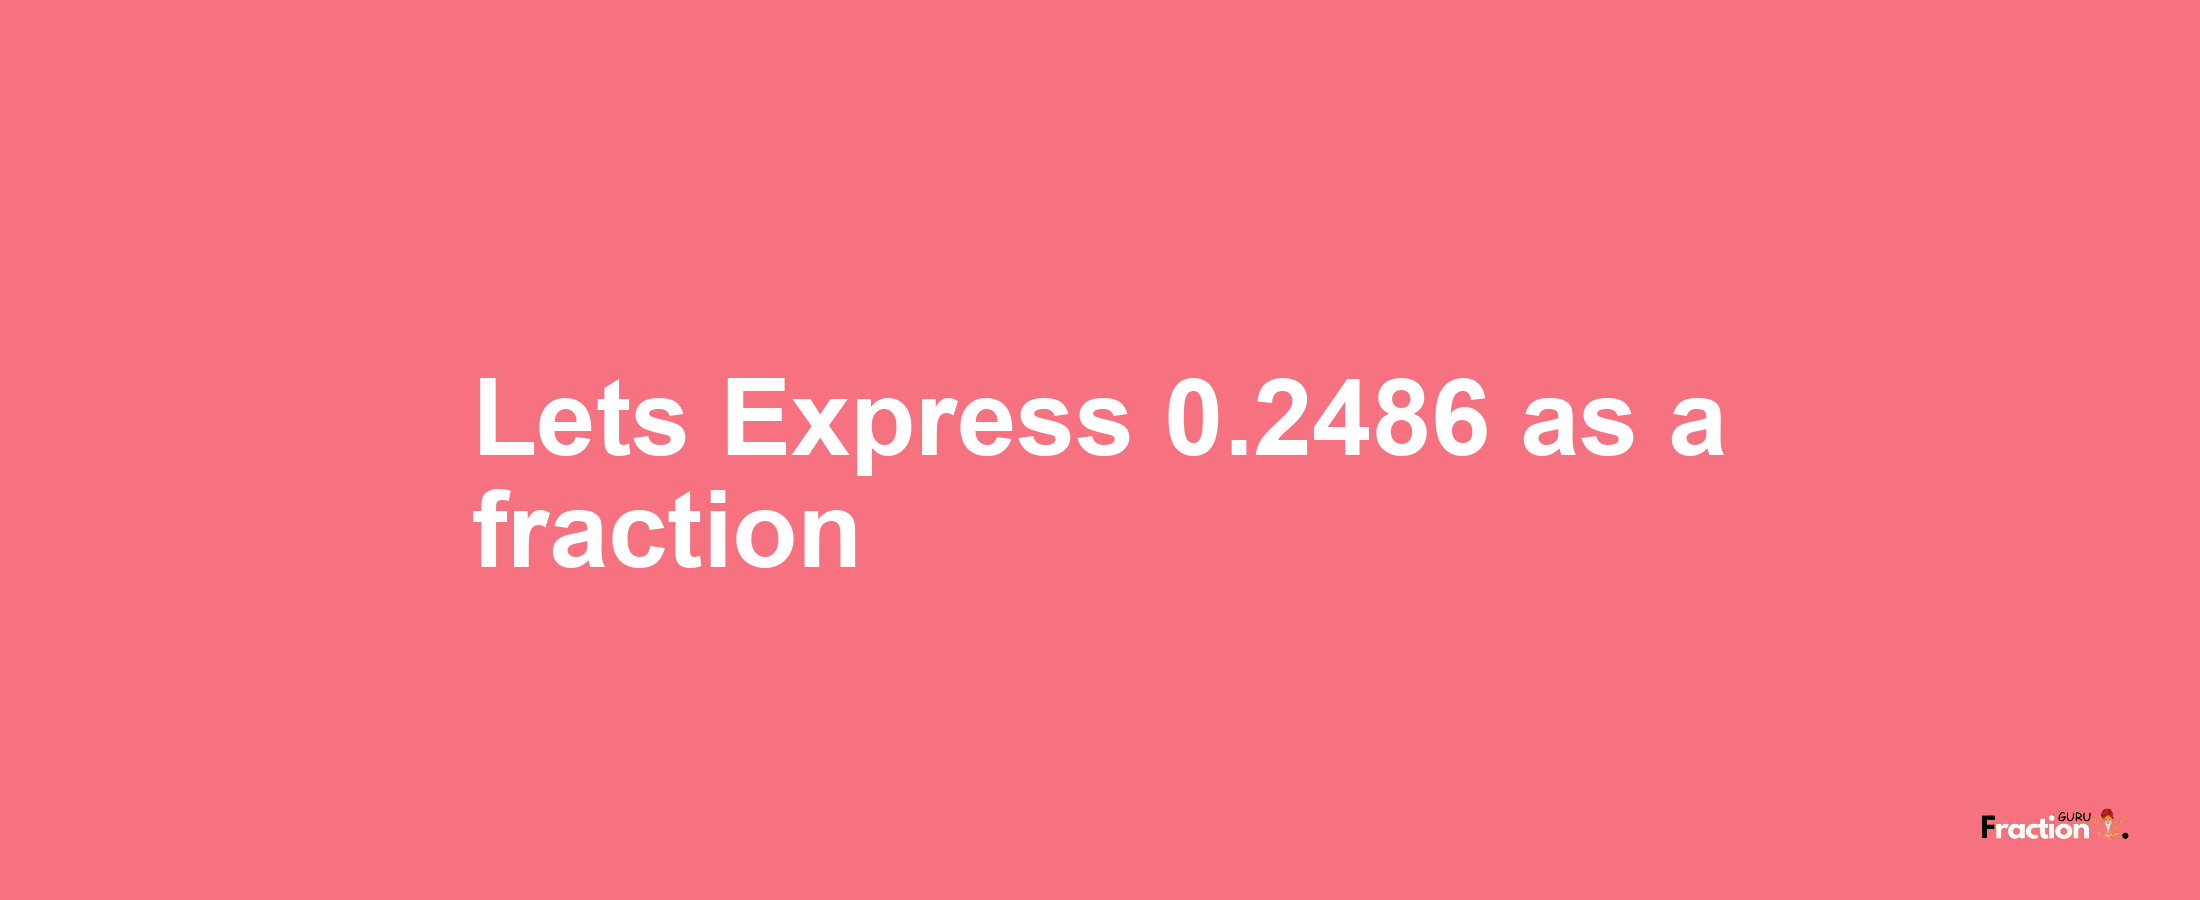 Lets Express 0.2486 as afraction